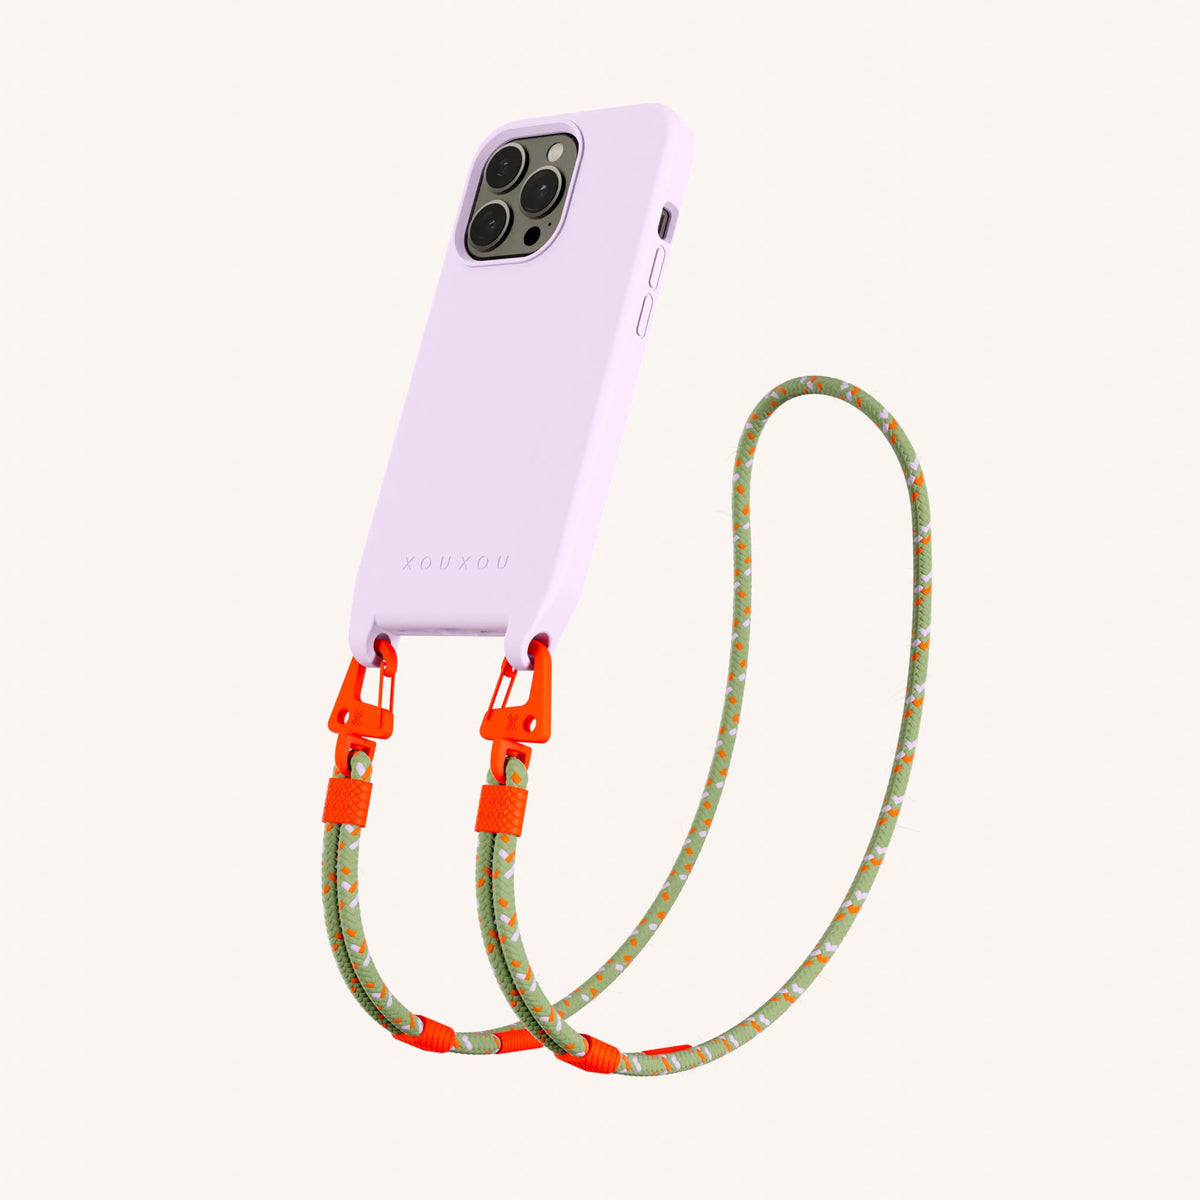 Phone Necklace with Carabiner Rope for iPhone 13 Pro with MagSafe in Lilac + Orange Camouflage Perspective View | XOUXOU #phone model_iphone 13 pro